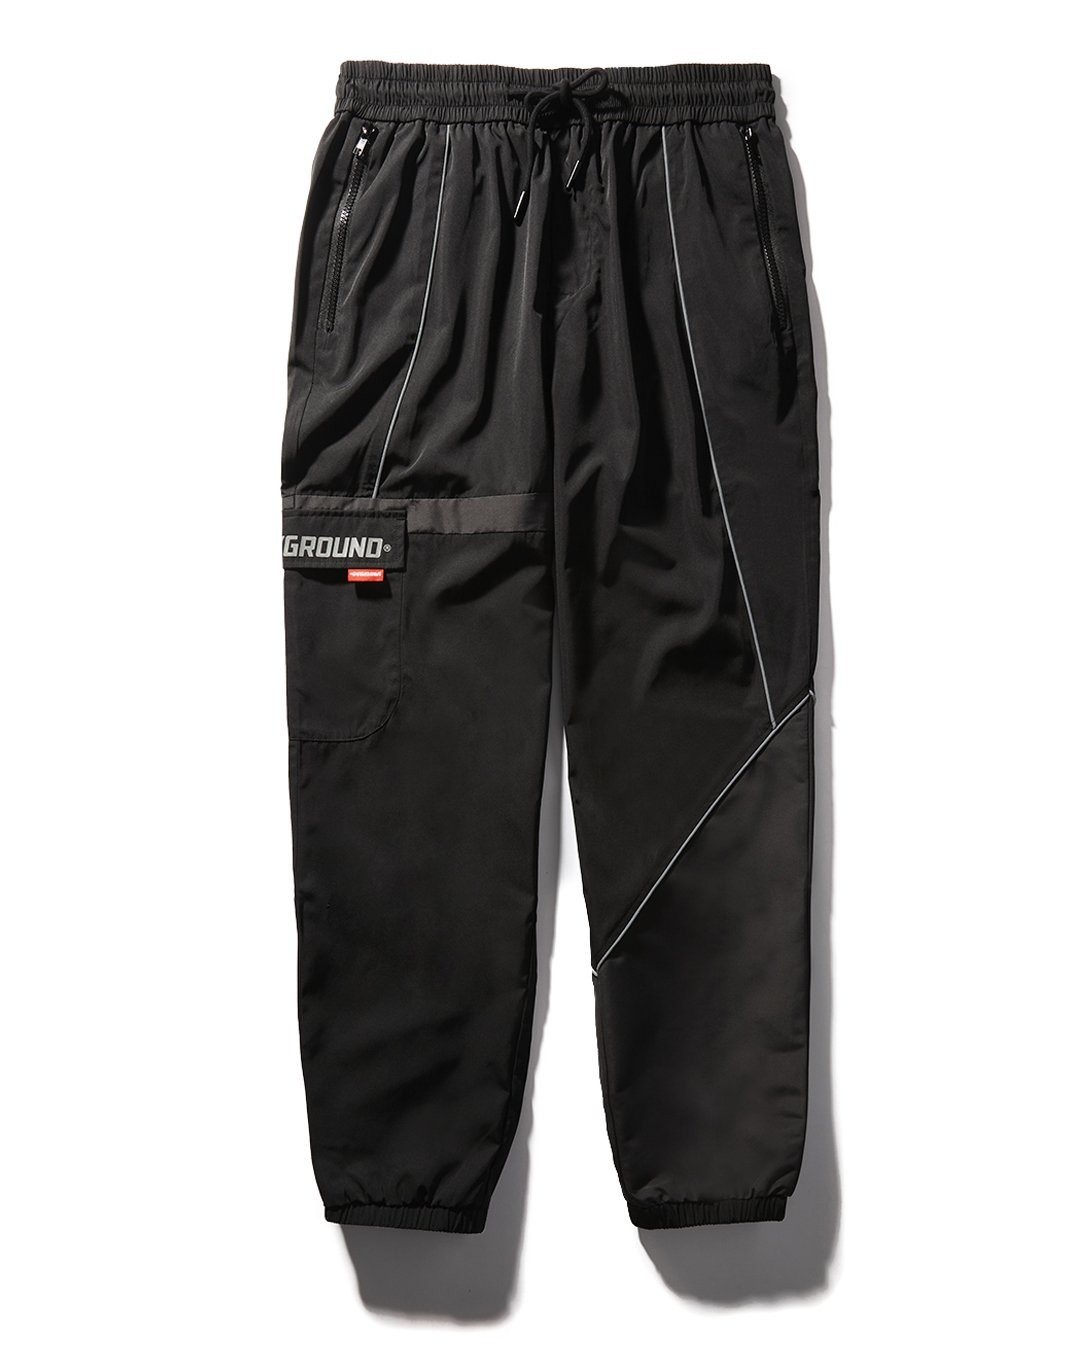 HOT SALE ☆☆☆ CHILL PILL TRACK PANTS - HOT SALE ☆☆☆ CHILL PILL TRACK PANTS-01-0